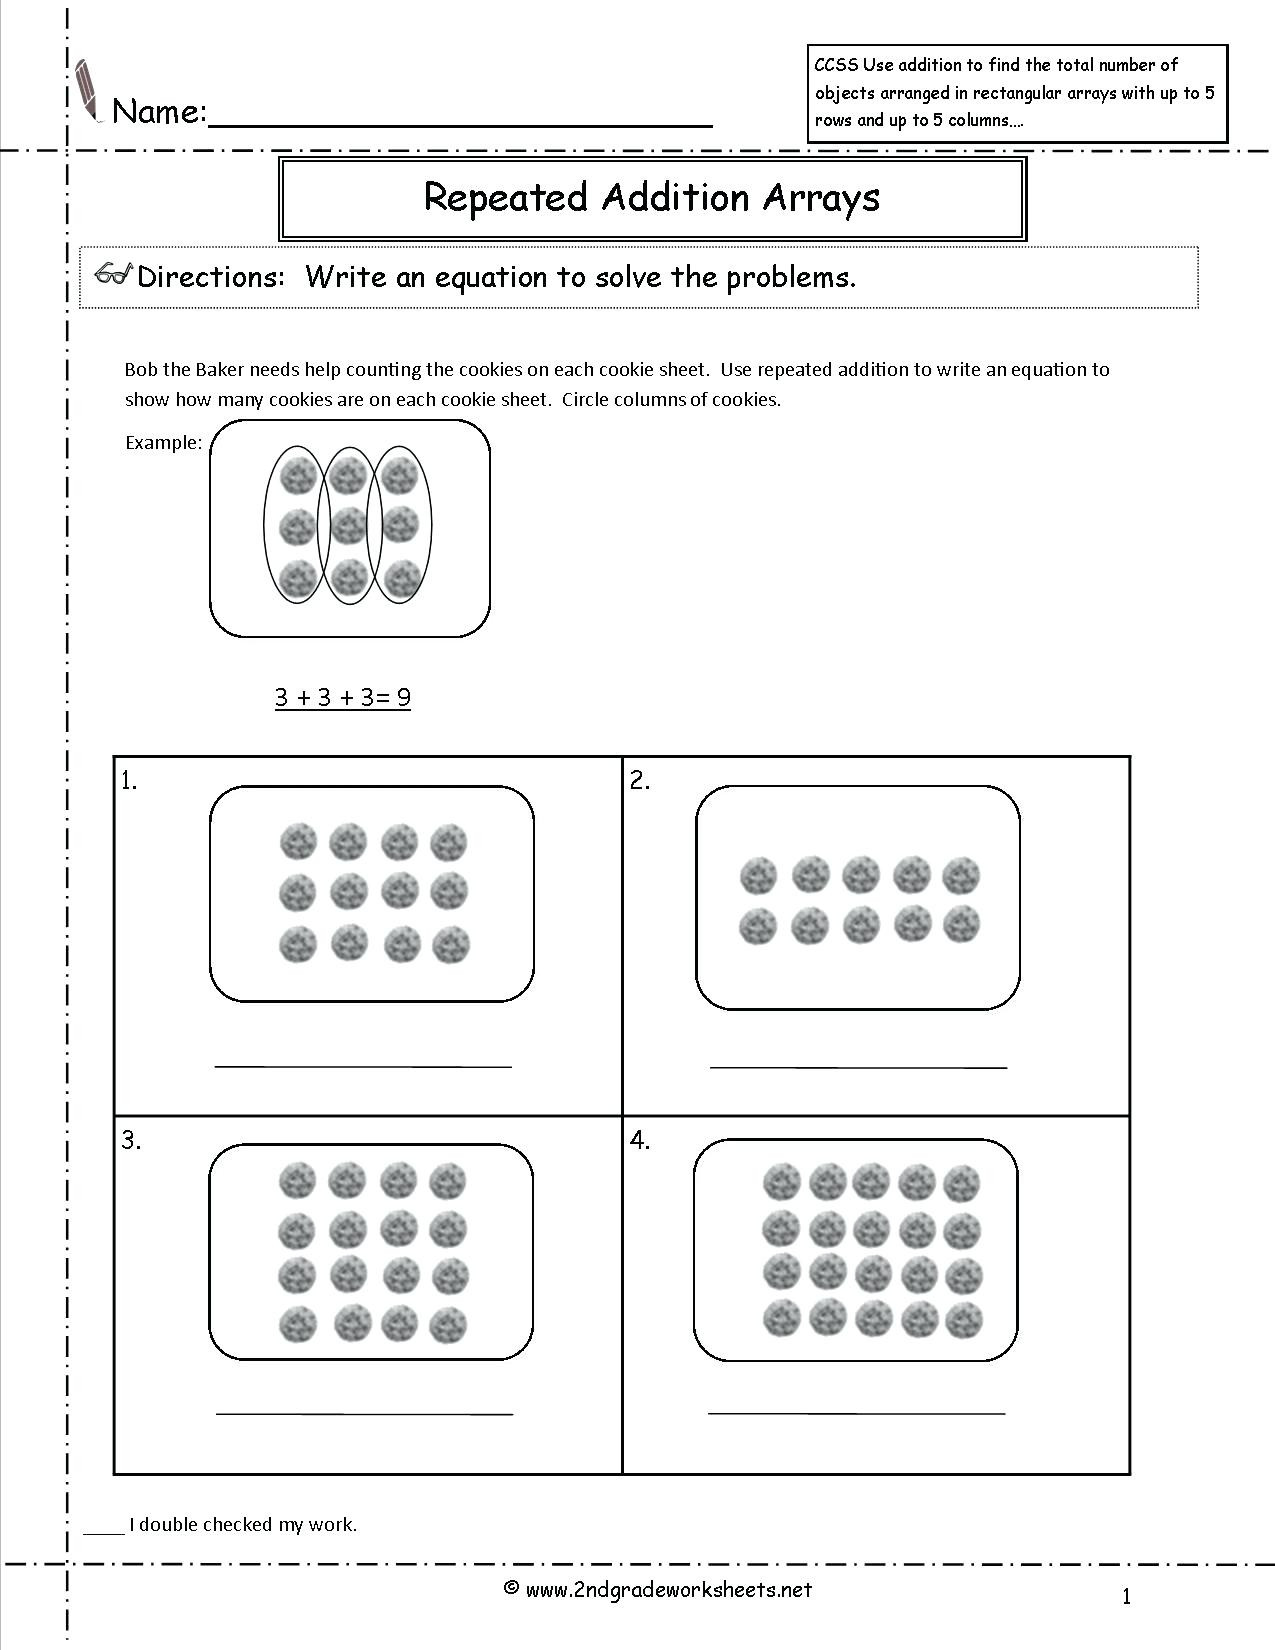 Free Math Worksheets Second Grade 2 Addition Add 4 2 Digit Numbers In Columns